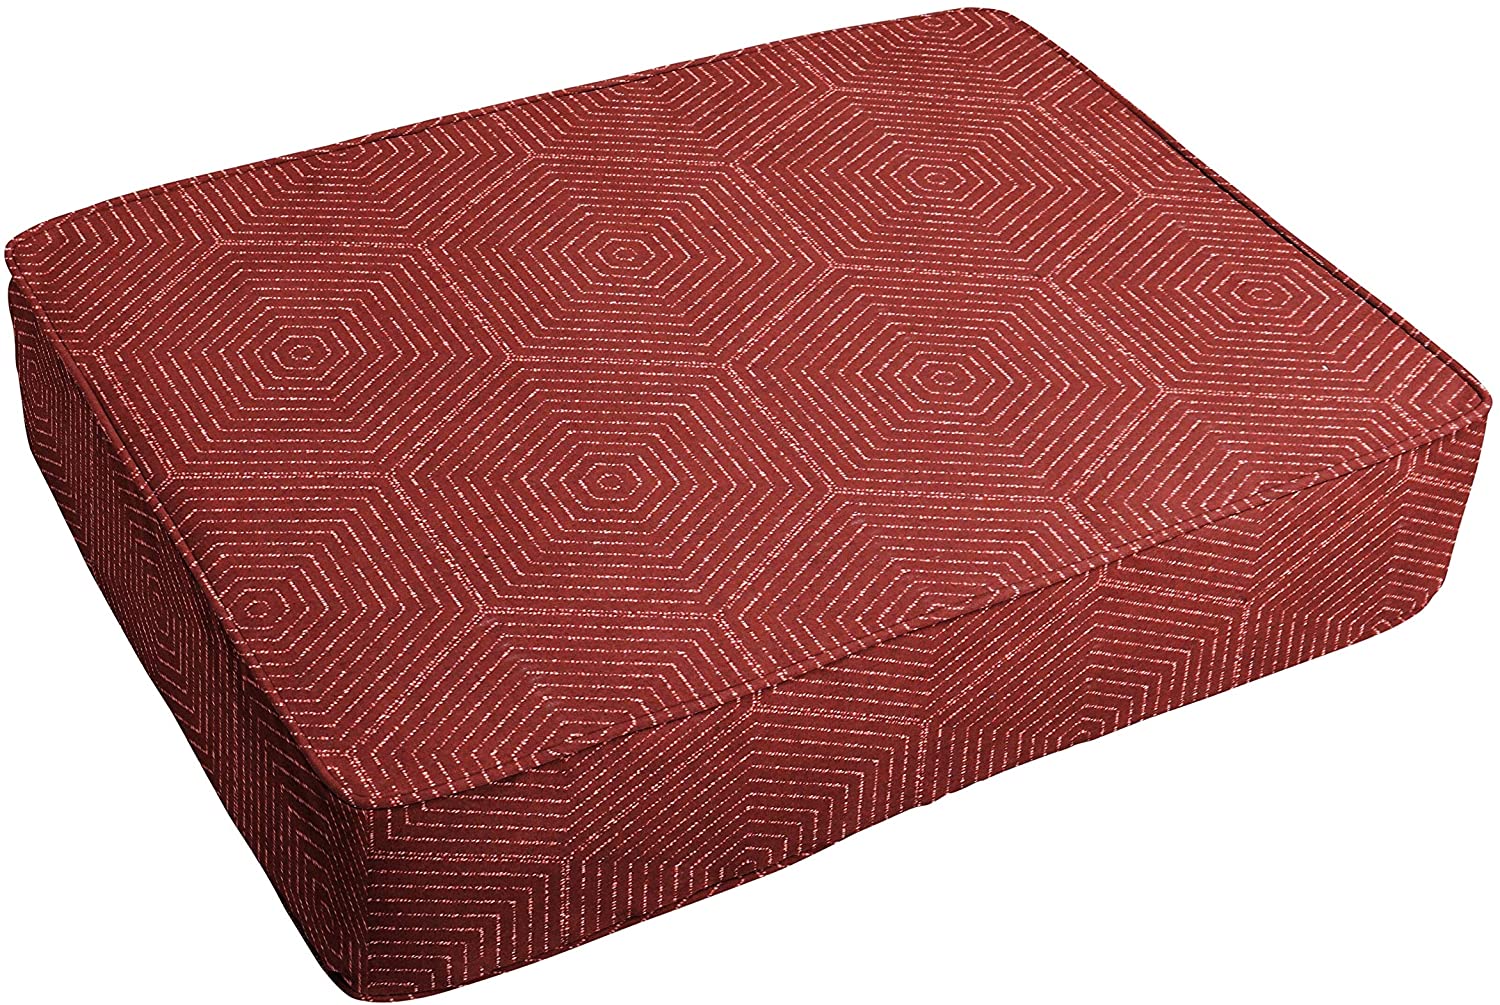 Burgundy Indoor/Outdoor Floor Cushion Corded Red Geometric Modern Contemporary Traditional Fade Resistant Uv Zippered Closure